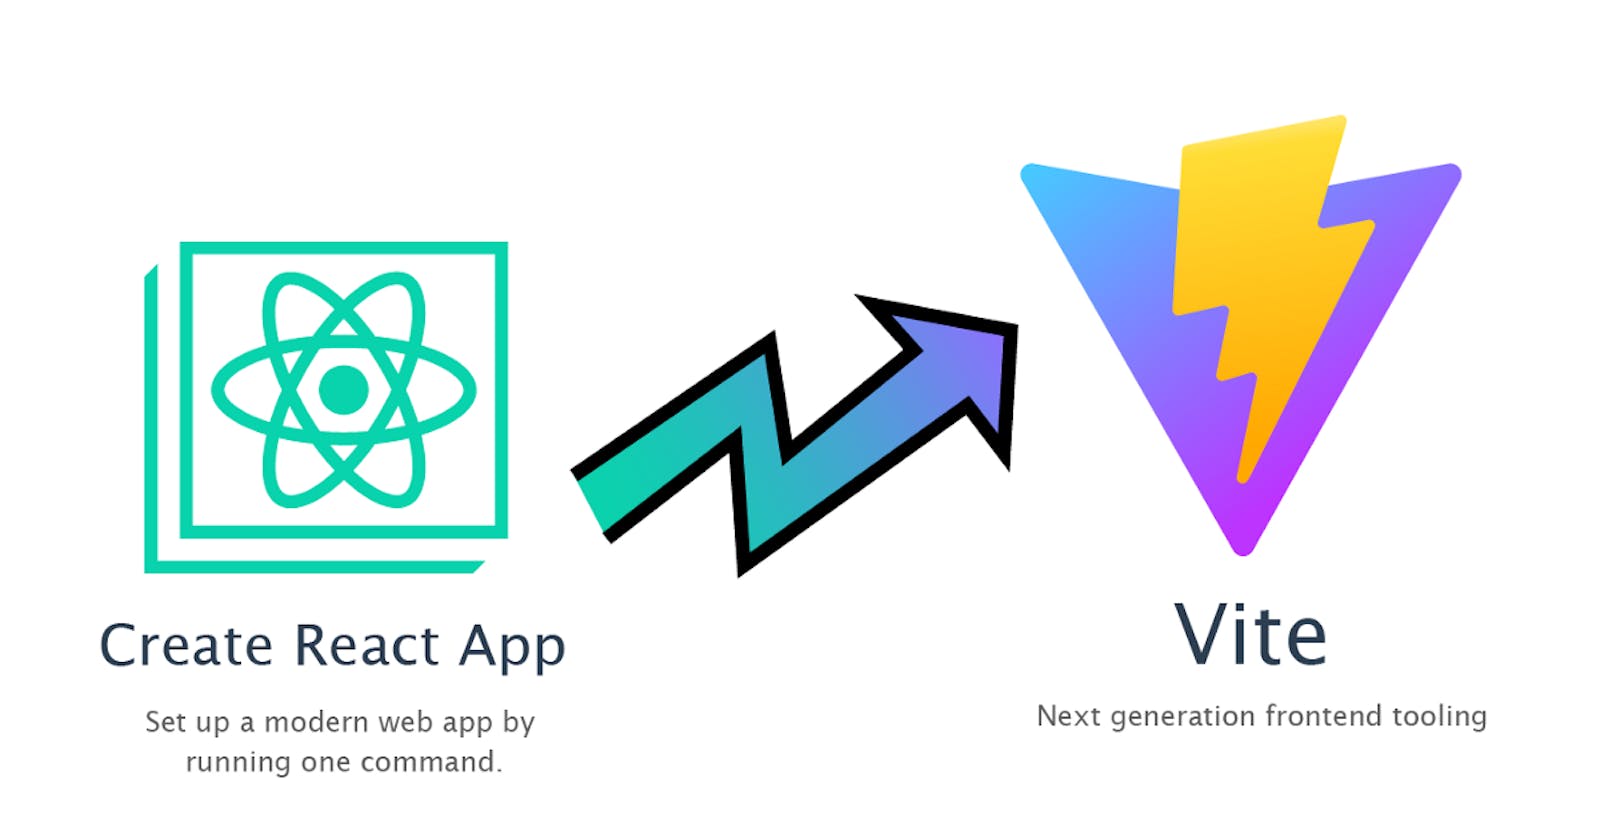 Why you should prefer Vite over Create-React-App